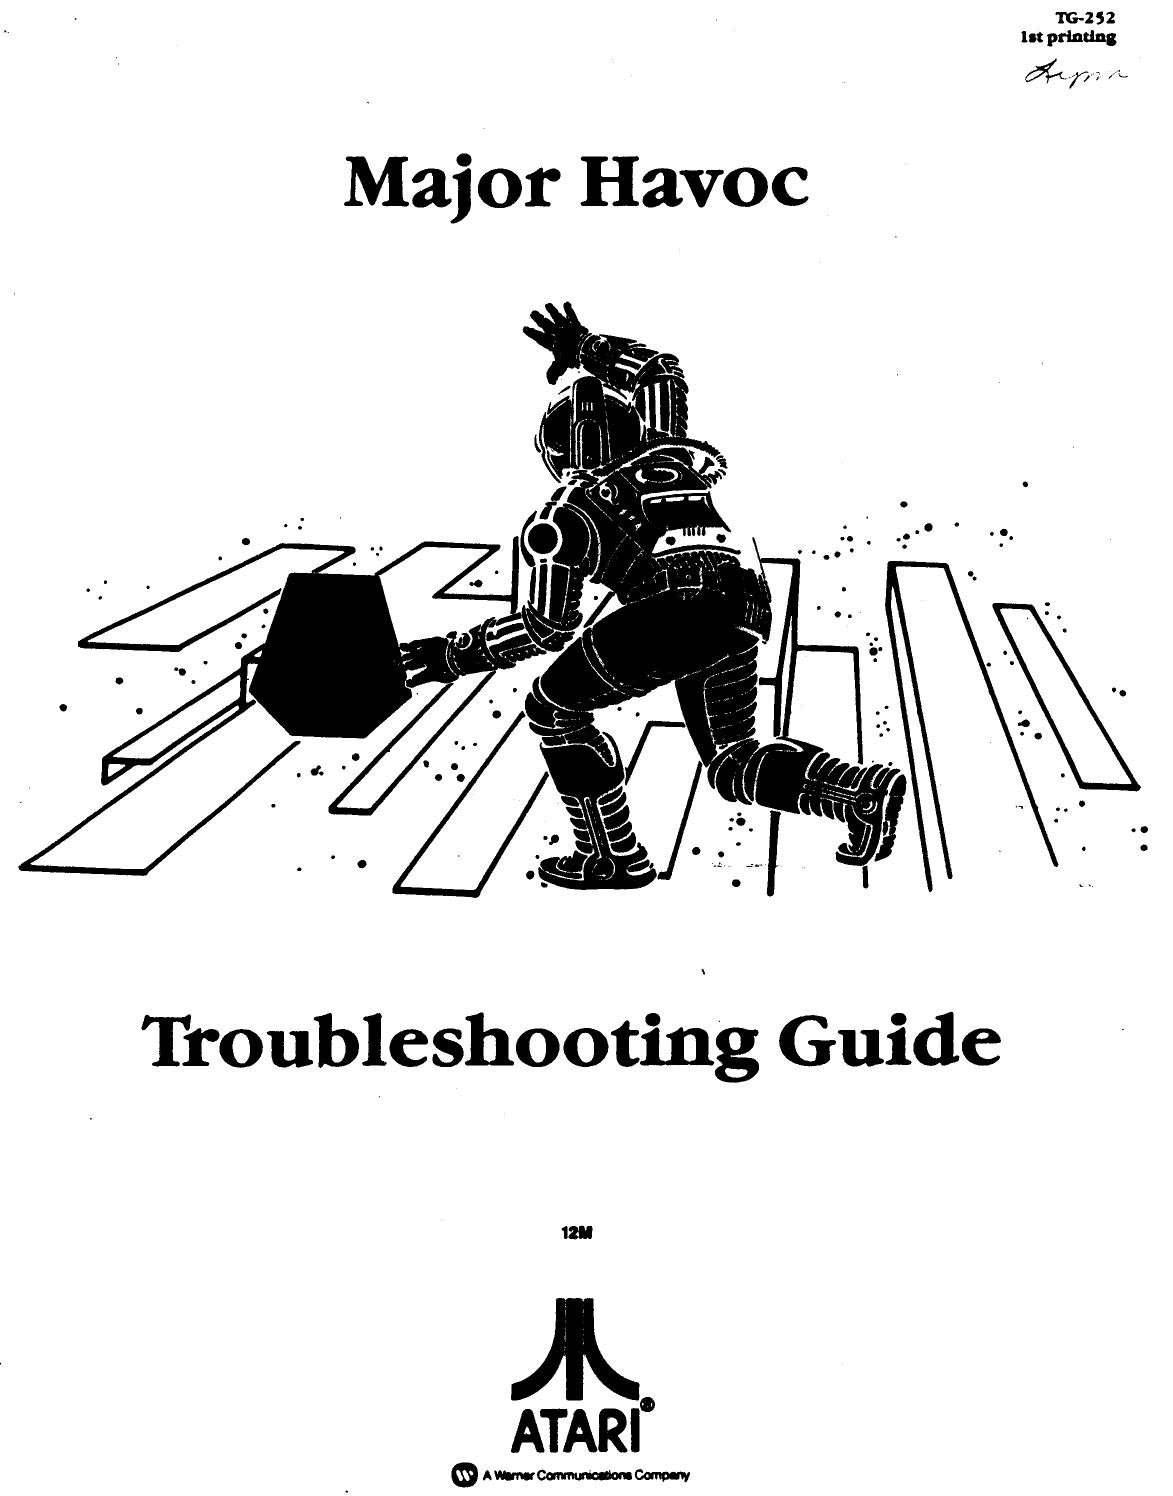 The Adventures of Major Havoc (TG-252) (Trouble Shooting Guide) (U)